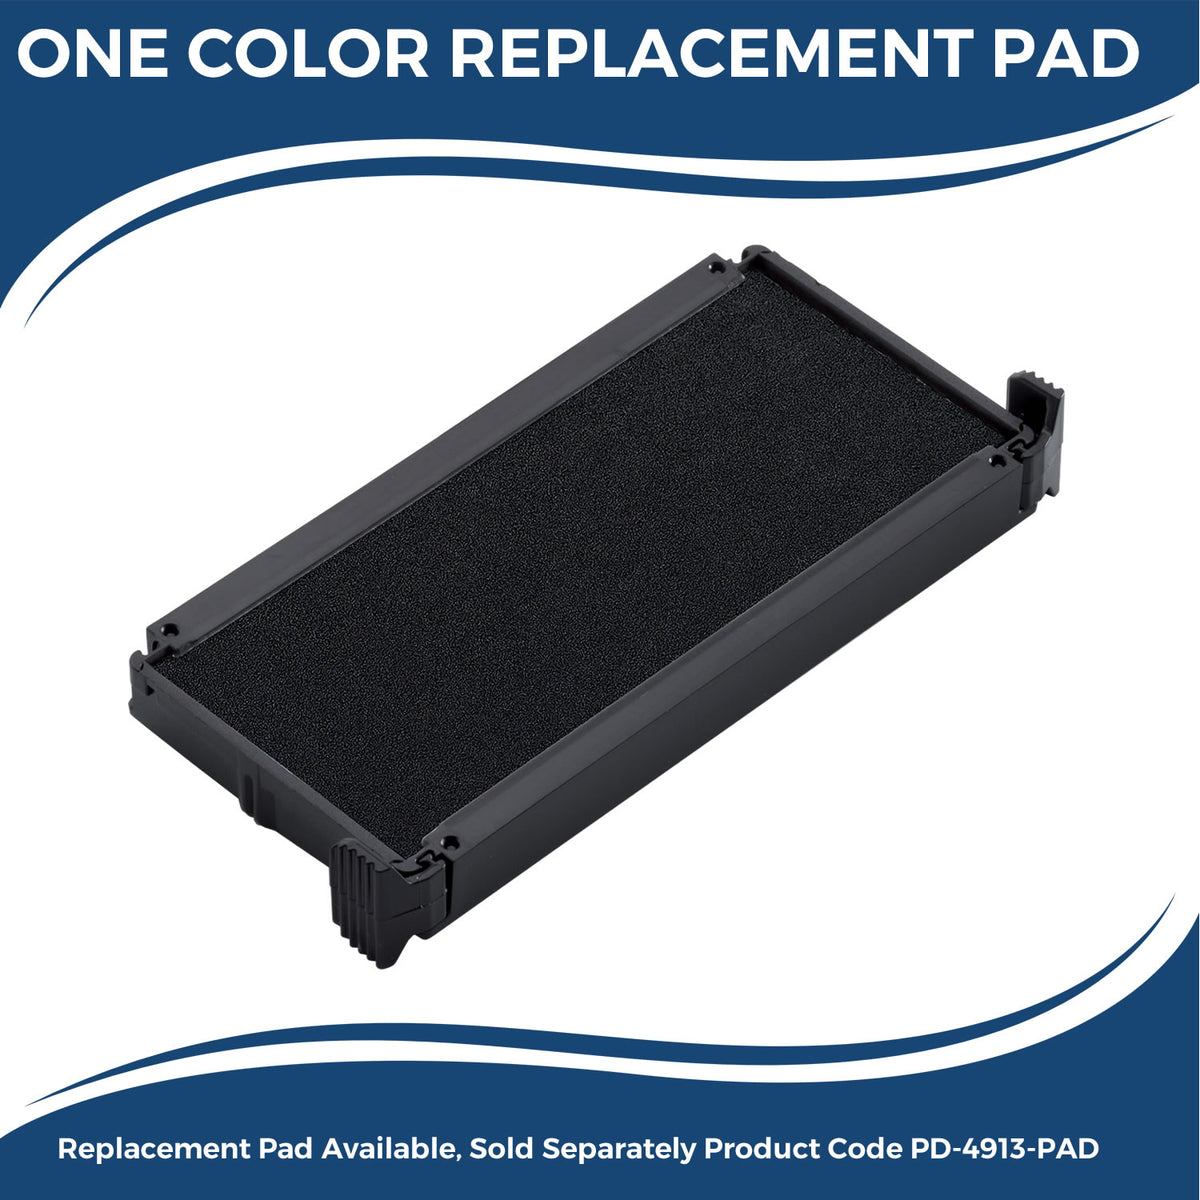 Large Self-Inking Credit Outline Stamp 4849S Large Replacment Pad